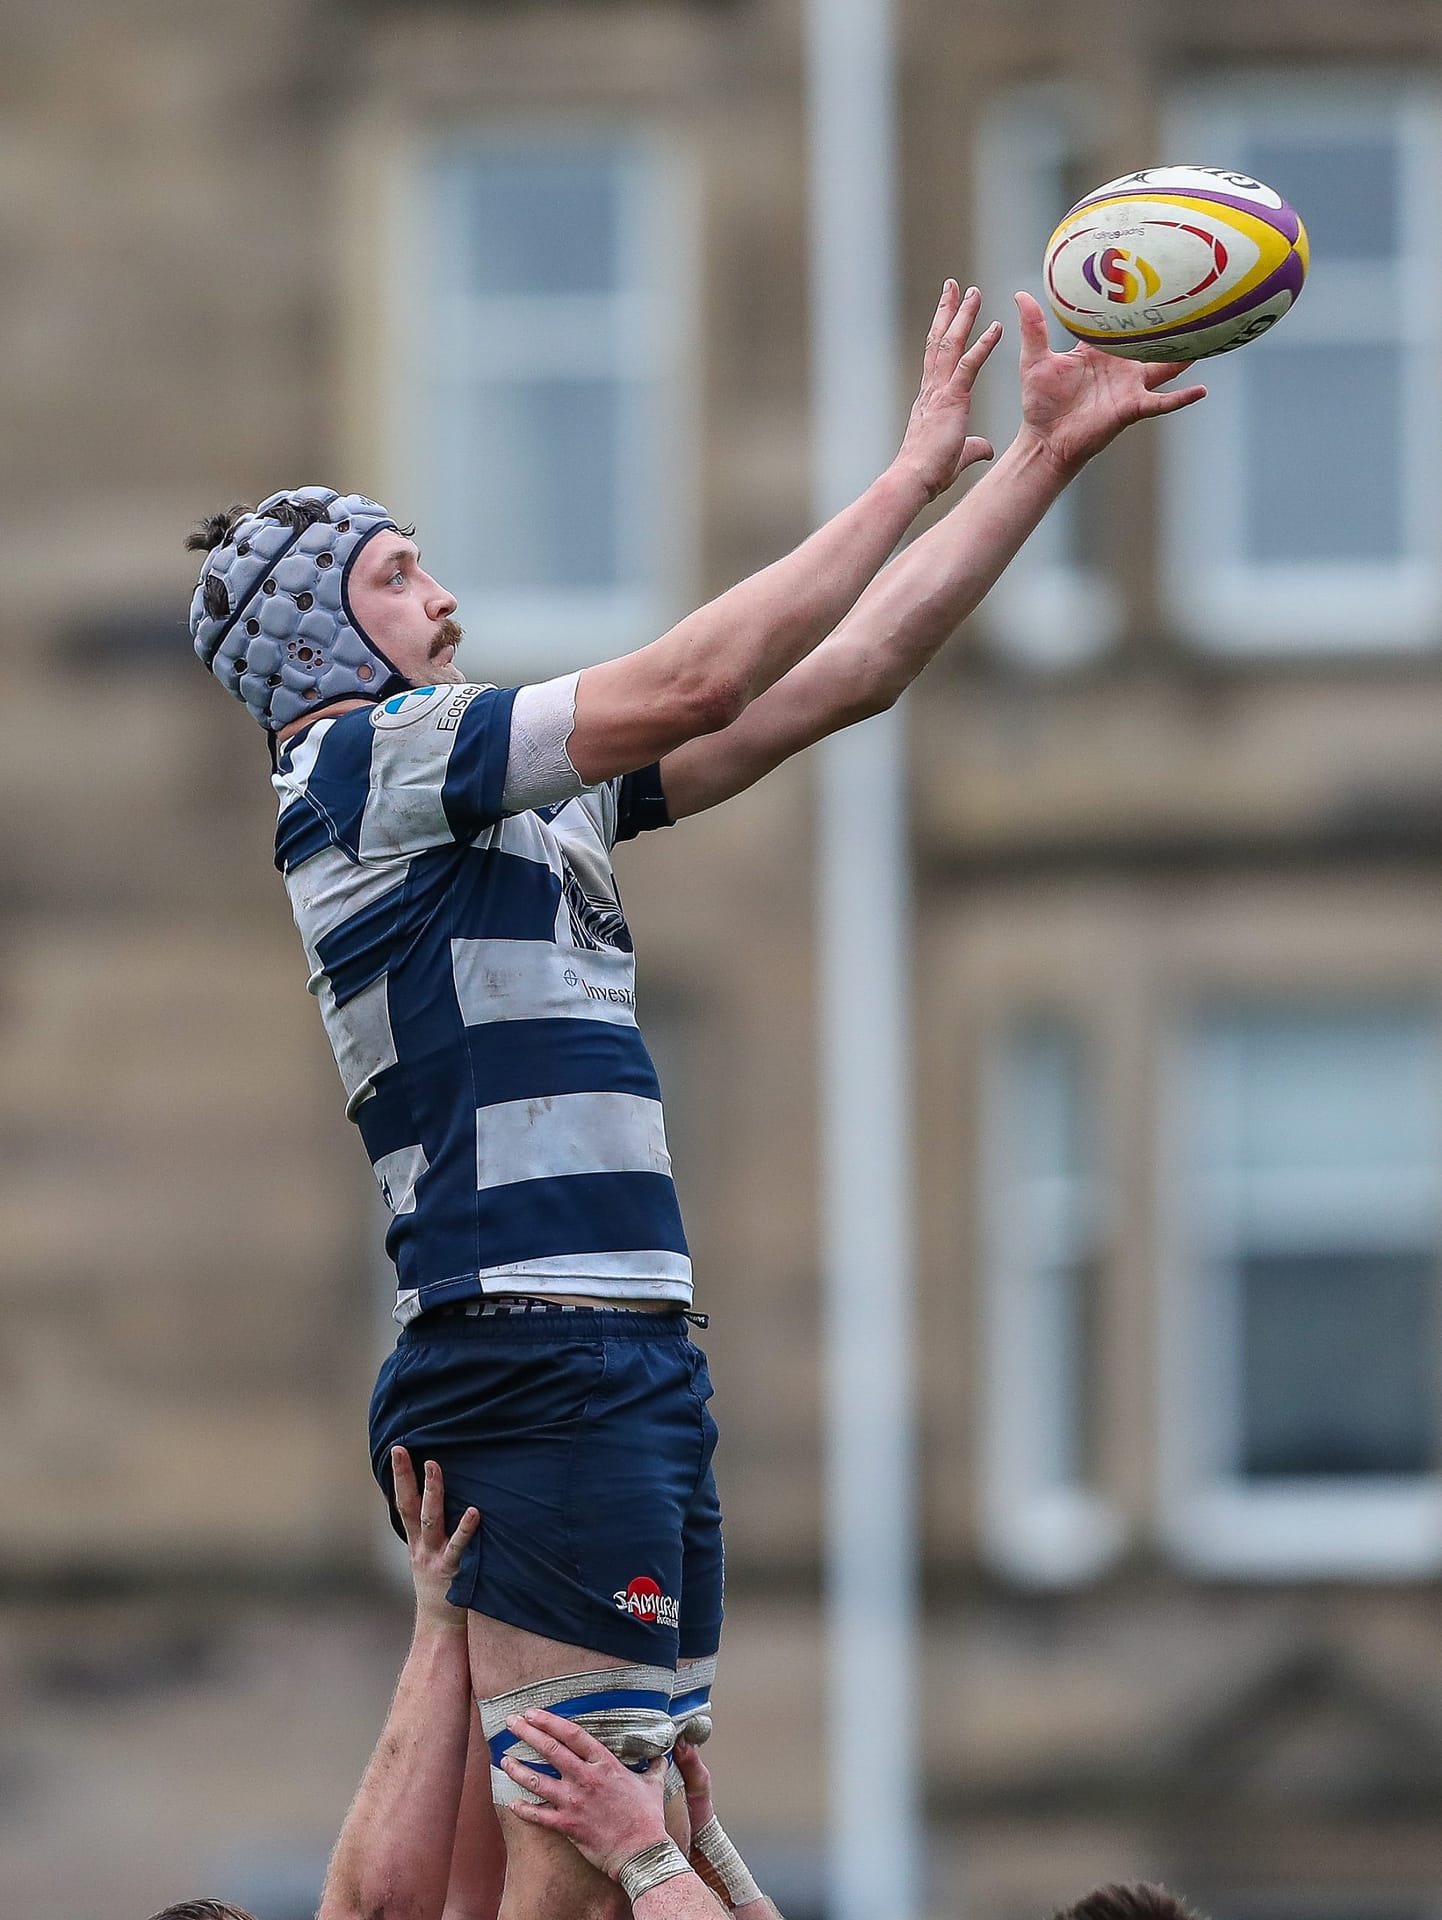 Heriots Callum Marshall collects a line out throw.FOSROC Super 6 match between Heriot's Rugby and Boroughmuir Bears at Goldenacre, Edinburgh on 09/10/2021. (Photo: 39 Design Photography)